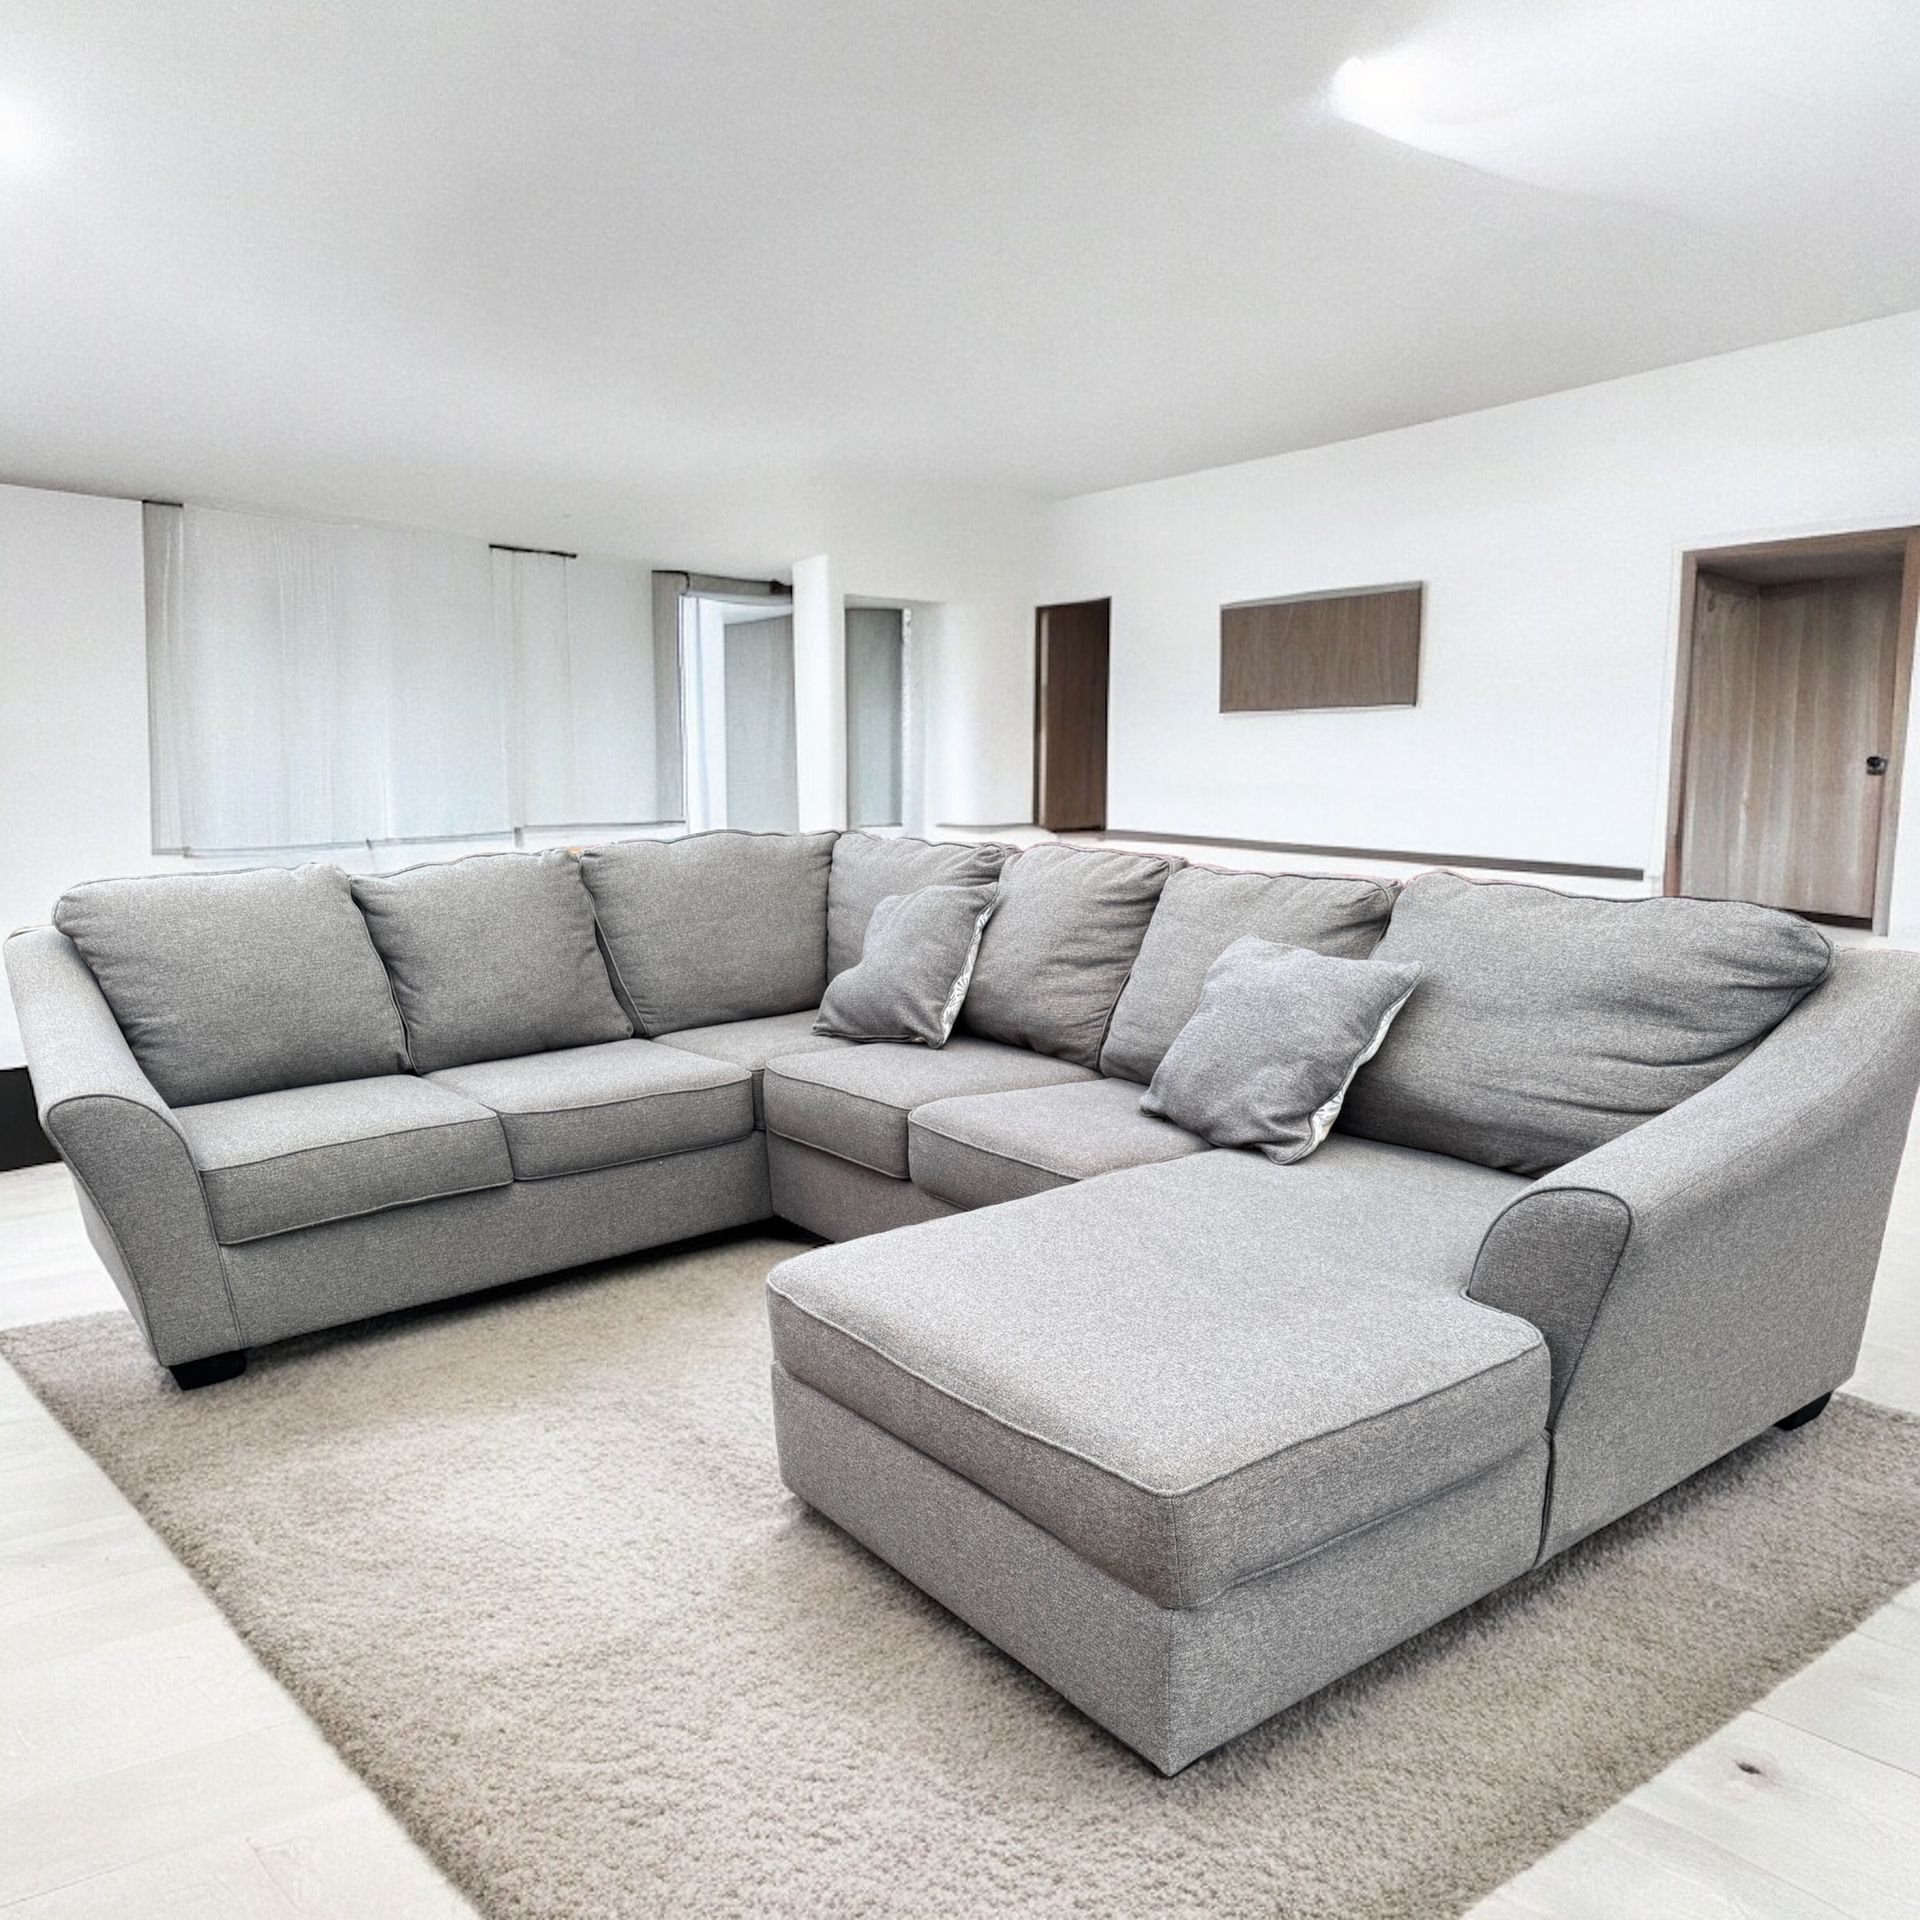 Grey U Sectional Couch - In immaculate condition